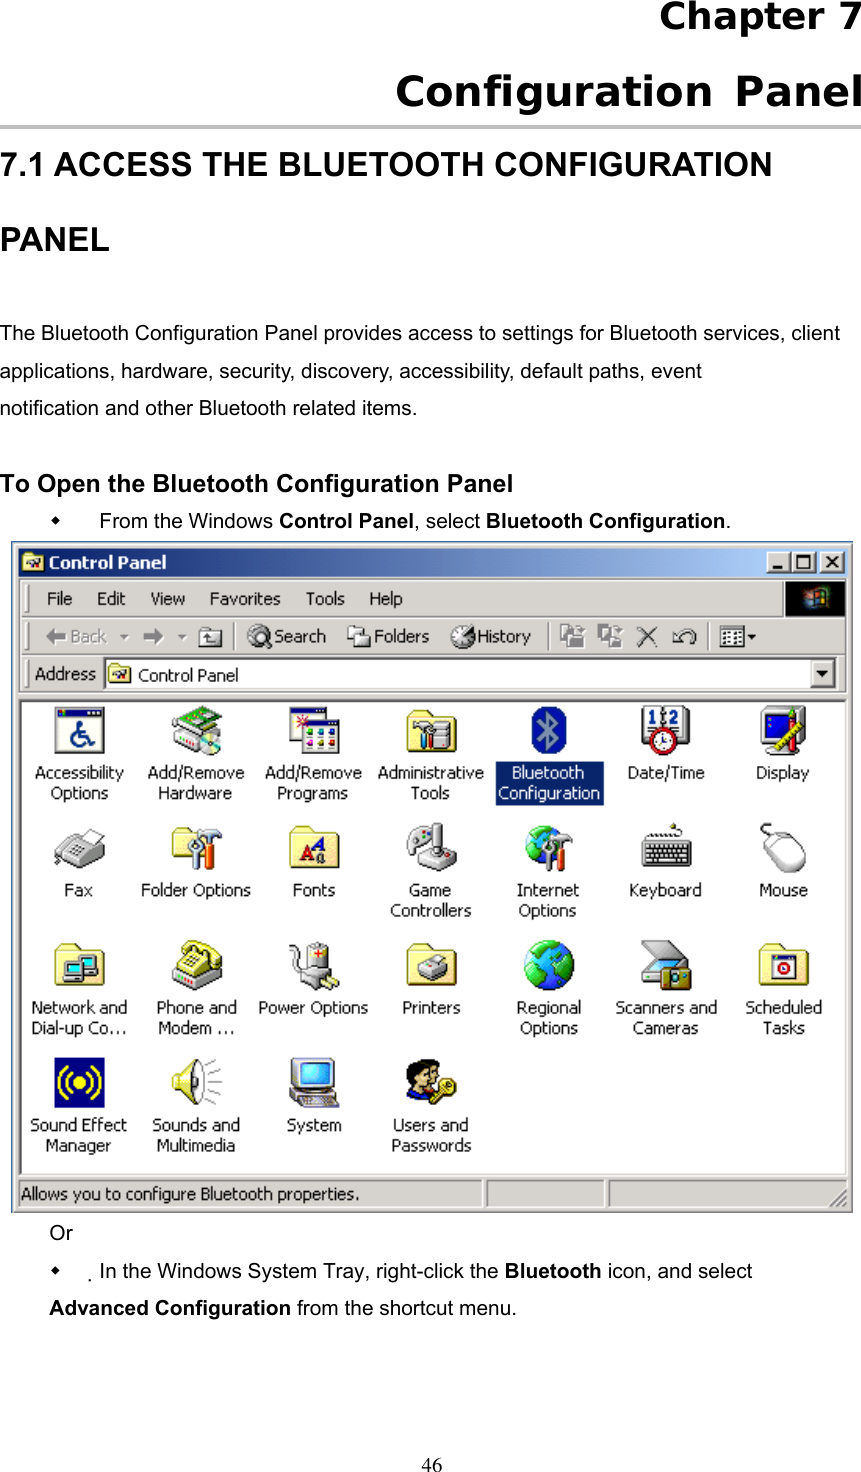 Chapter 7  Configuration Panel 7.1 ACCESS THE BLUETOOTH CONFIGURATION PANEL  The Bluetooth Configuration Panel provides access to settings for Bluetooth services, client applications, hardware, security, discovery, accessibility, default paths, event notification and other Bluetooth related items.  To Open the Bluetooth Configuration Panel   From the Windows Control Panel, select Bluetooth Configuration.  Or   In the Windows System Tray, right-click the Bluetooth icon, and select Advanced Configuration from the shortcut menu.  46 